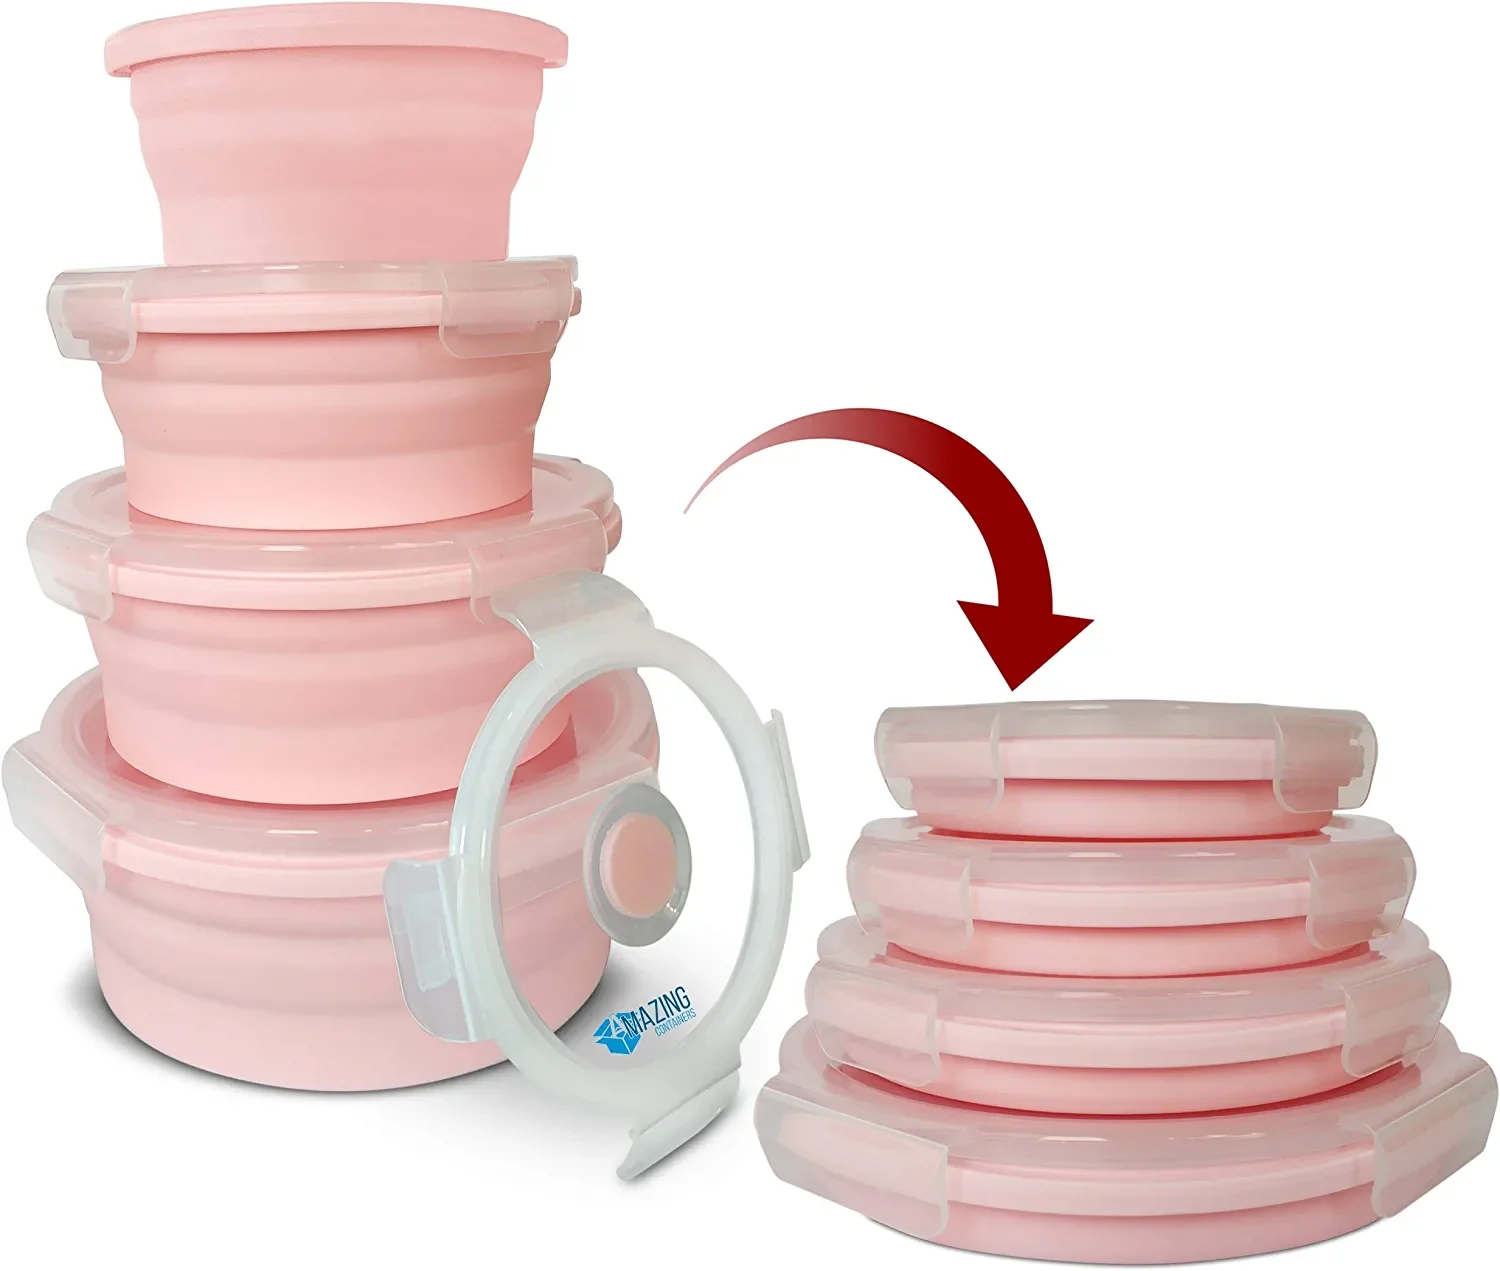 http://cdn.apartmenttherapy.info/image/upload/v1671568015/k/Best_collapsible_food_storage_containers.webp